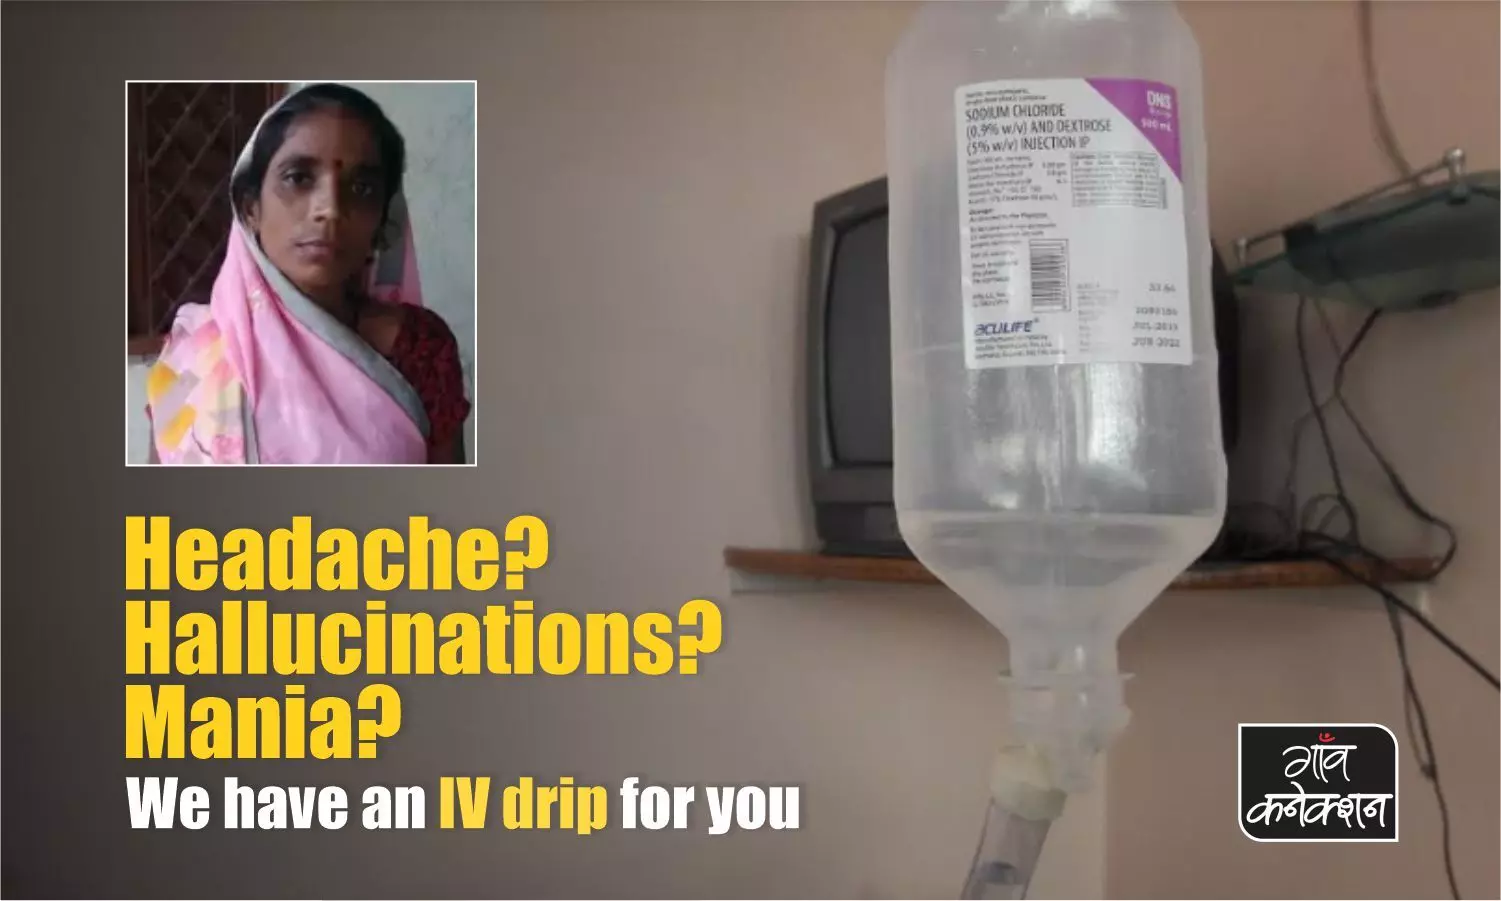 In villages, quacks randomly use IV drips to treat fever, headache and even psychotic disorders